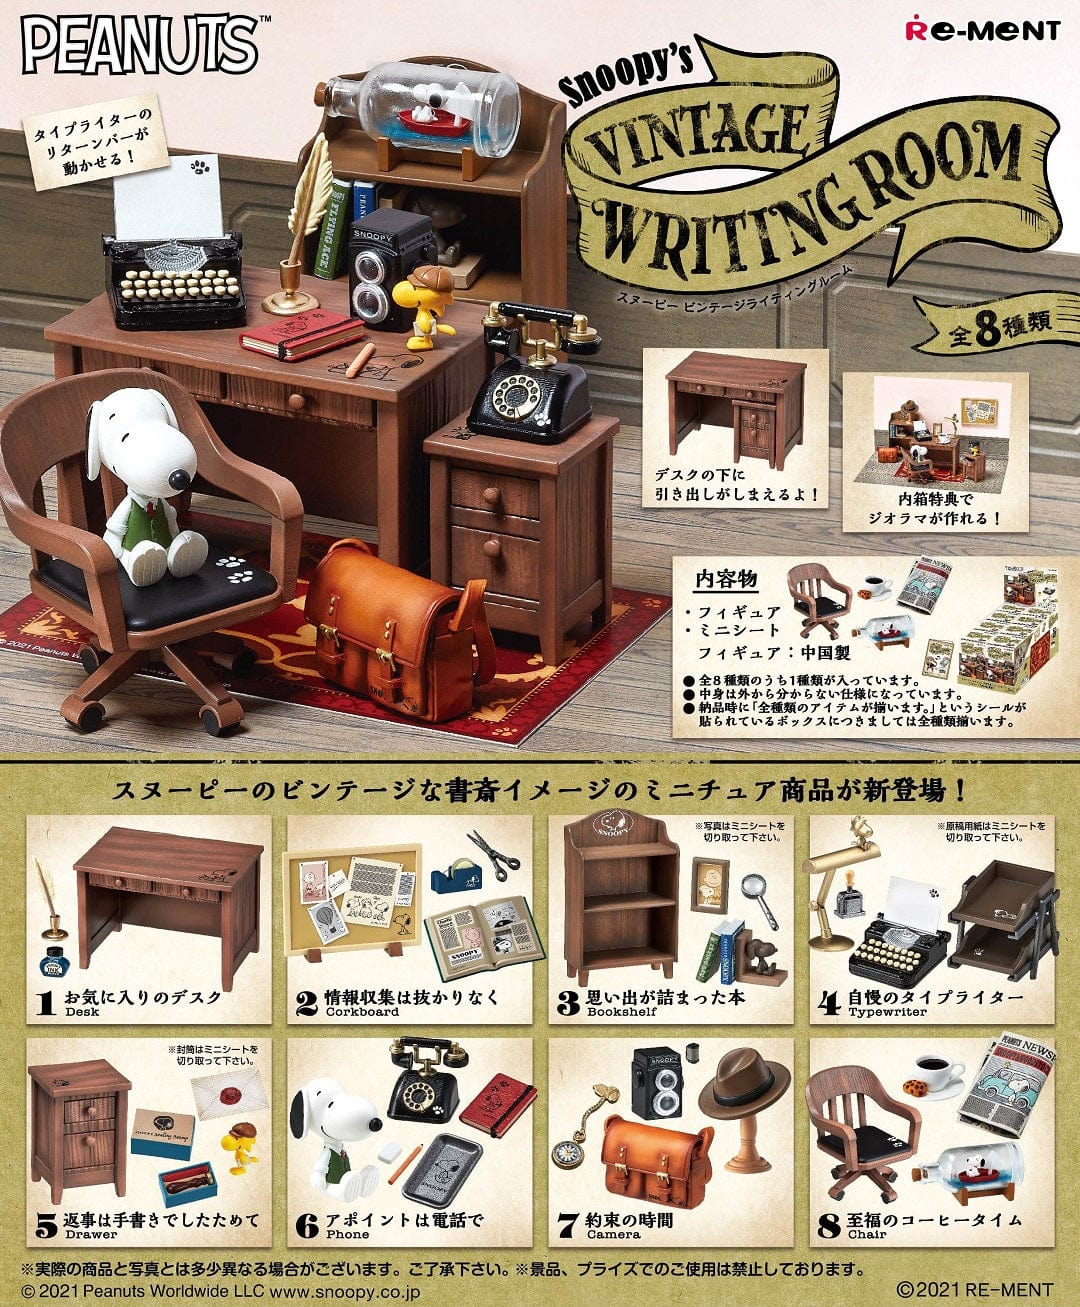 RE-MENT Snoopy Vintage Writing Room